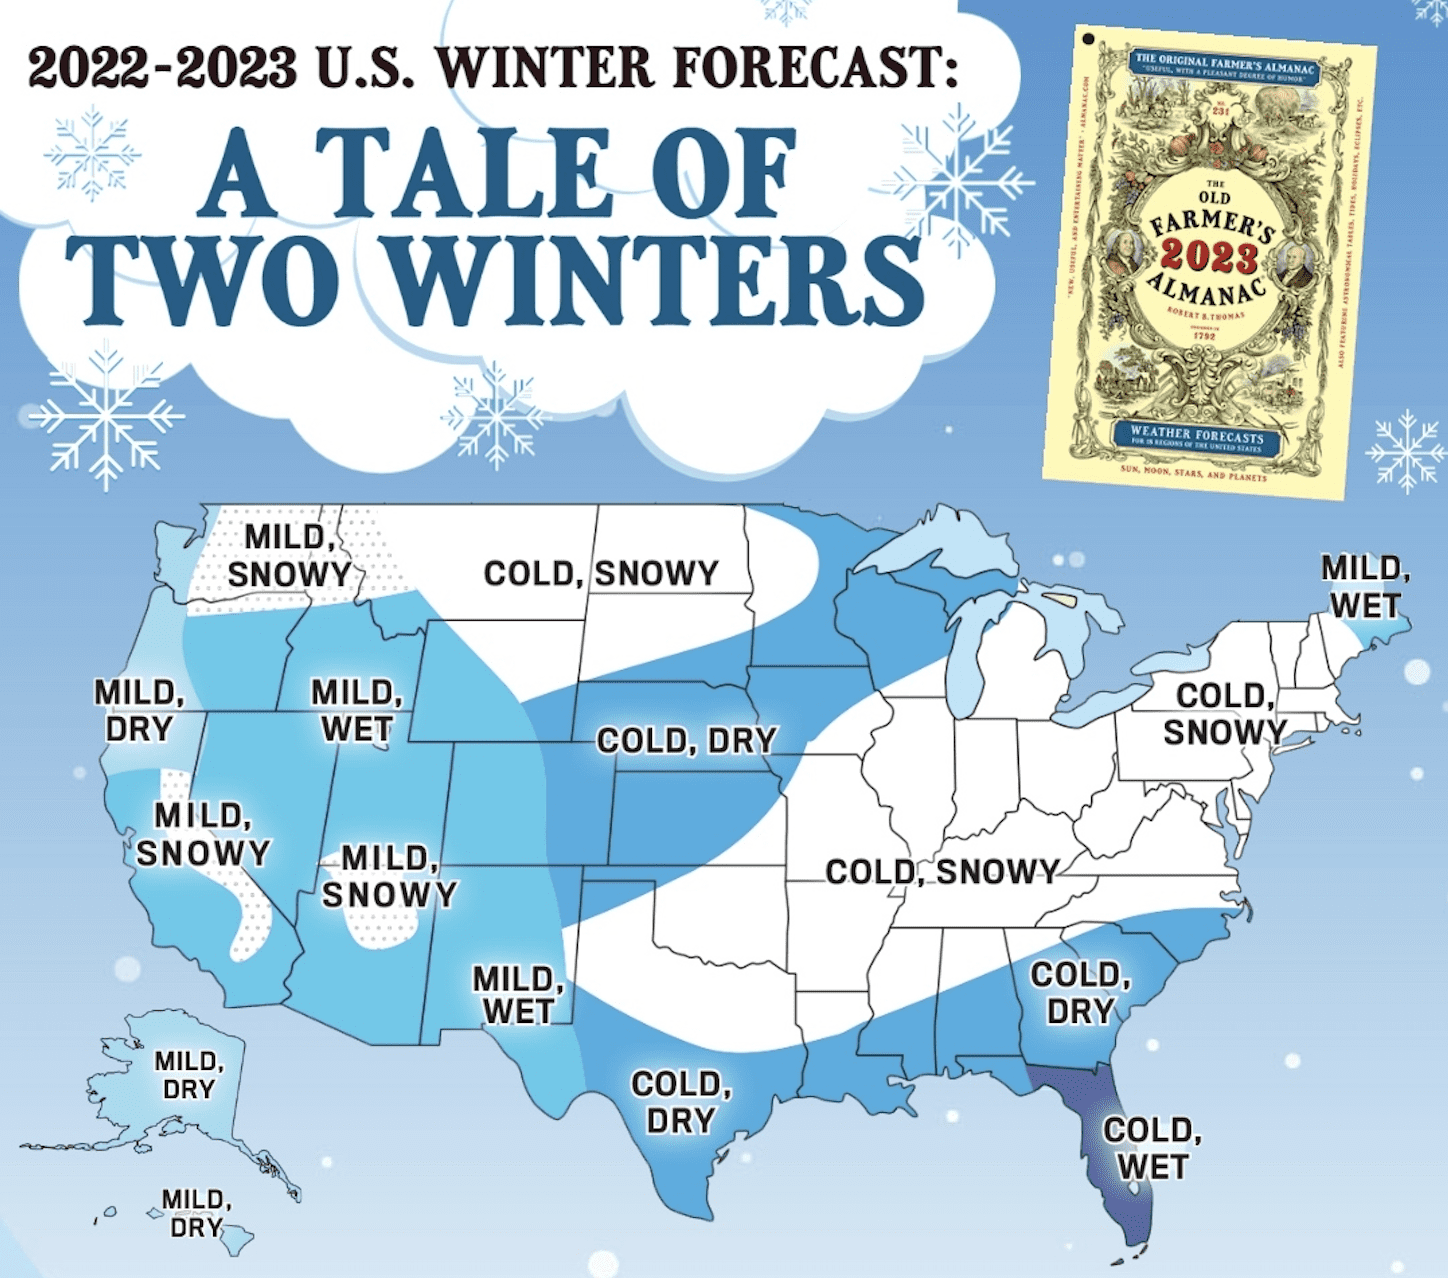 Old Farmer’s Almanac Predicts “Tale Of Two Winters” For 2023